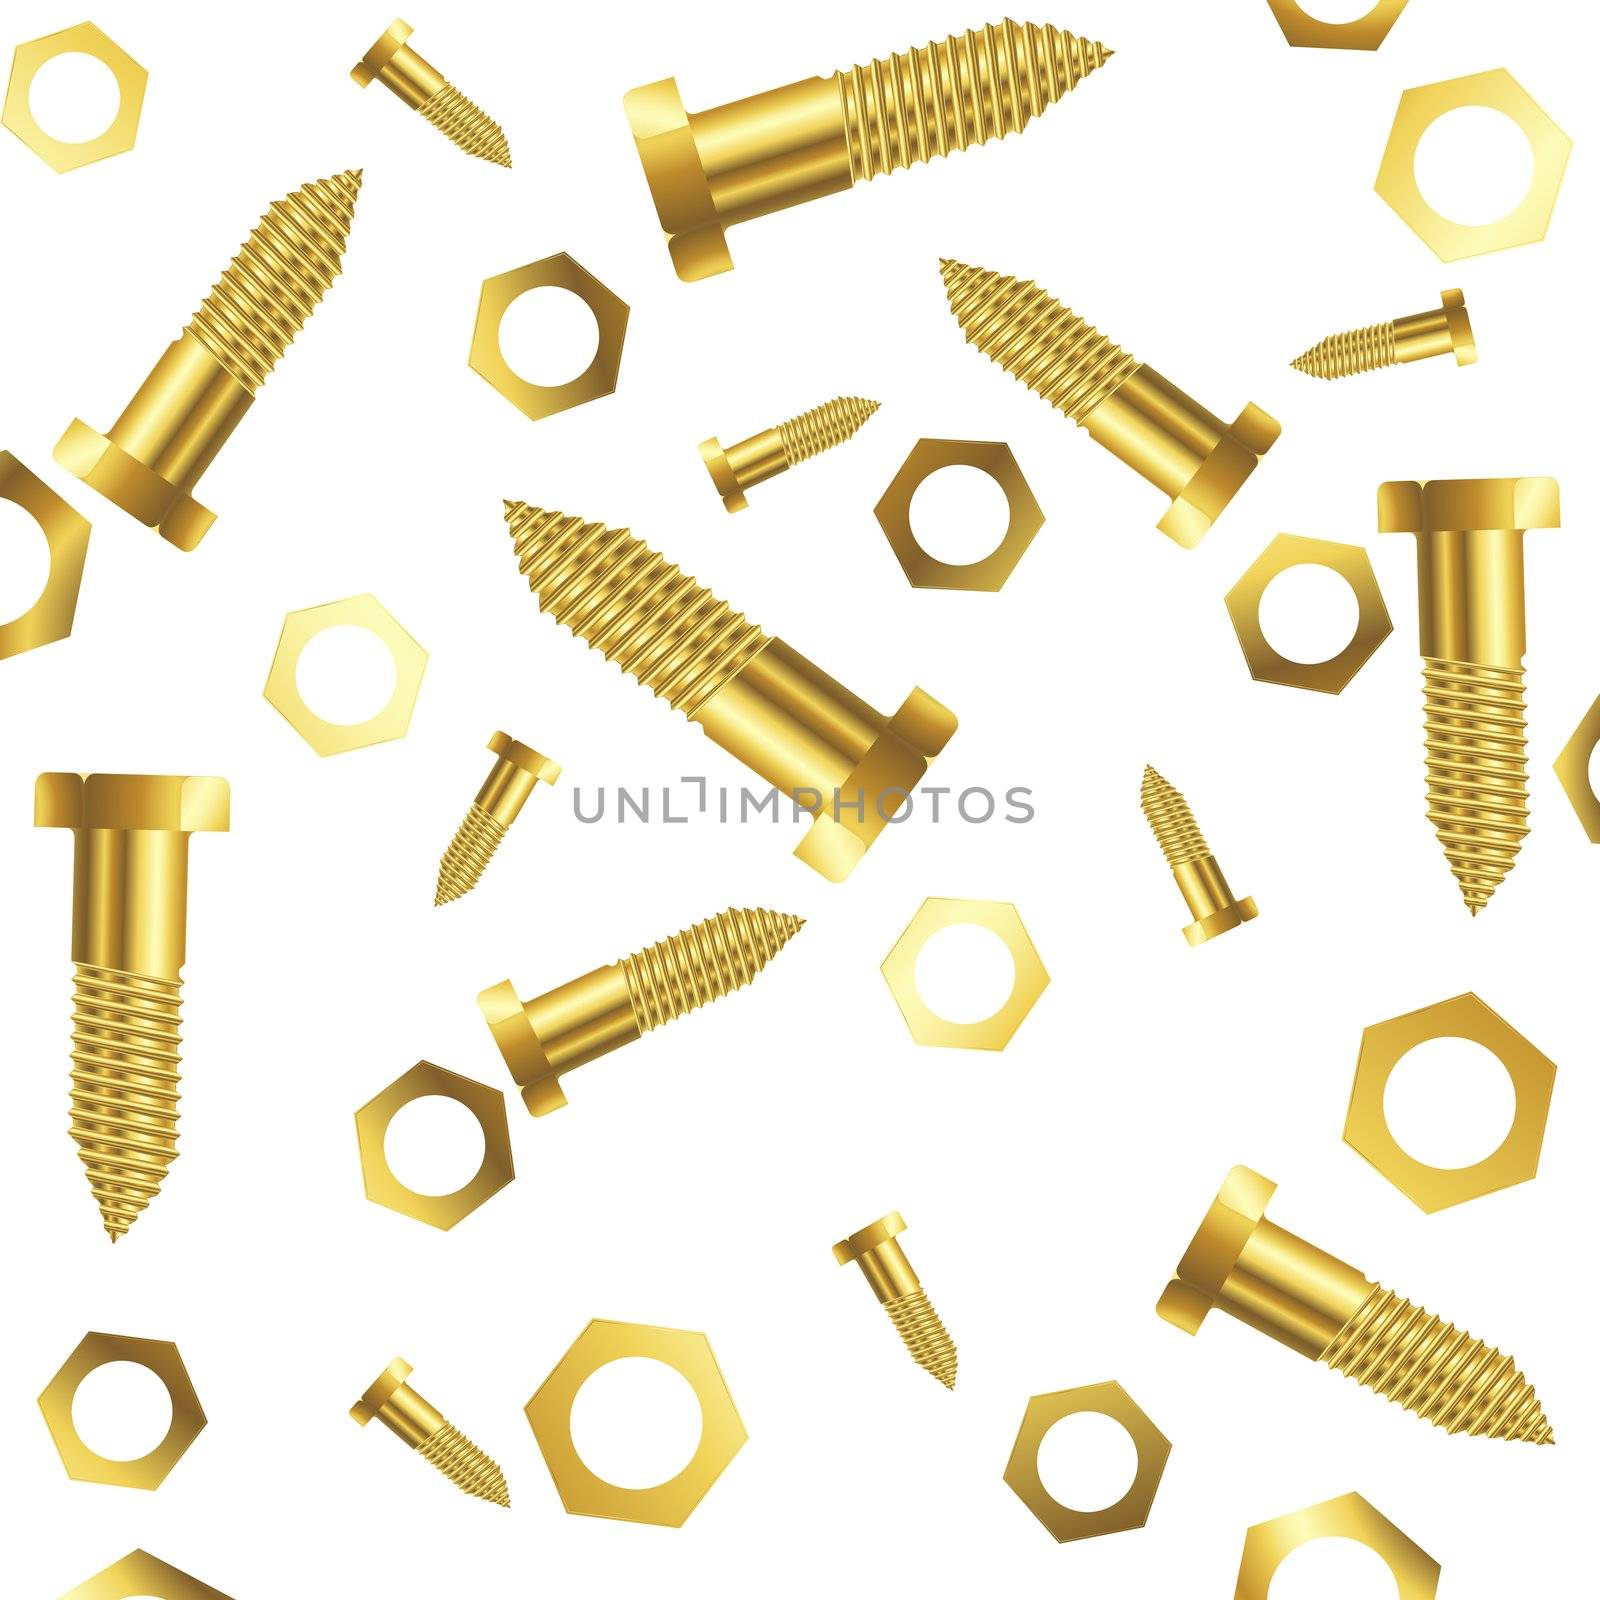 screws and nuts over white background by robertosch